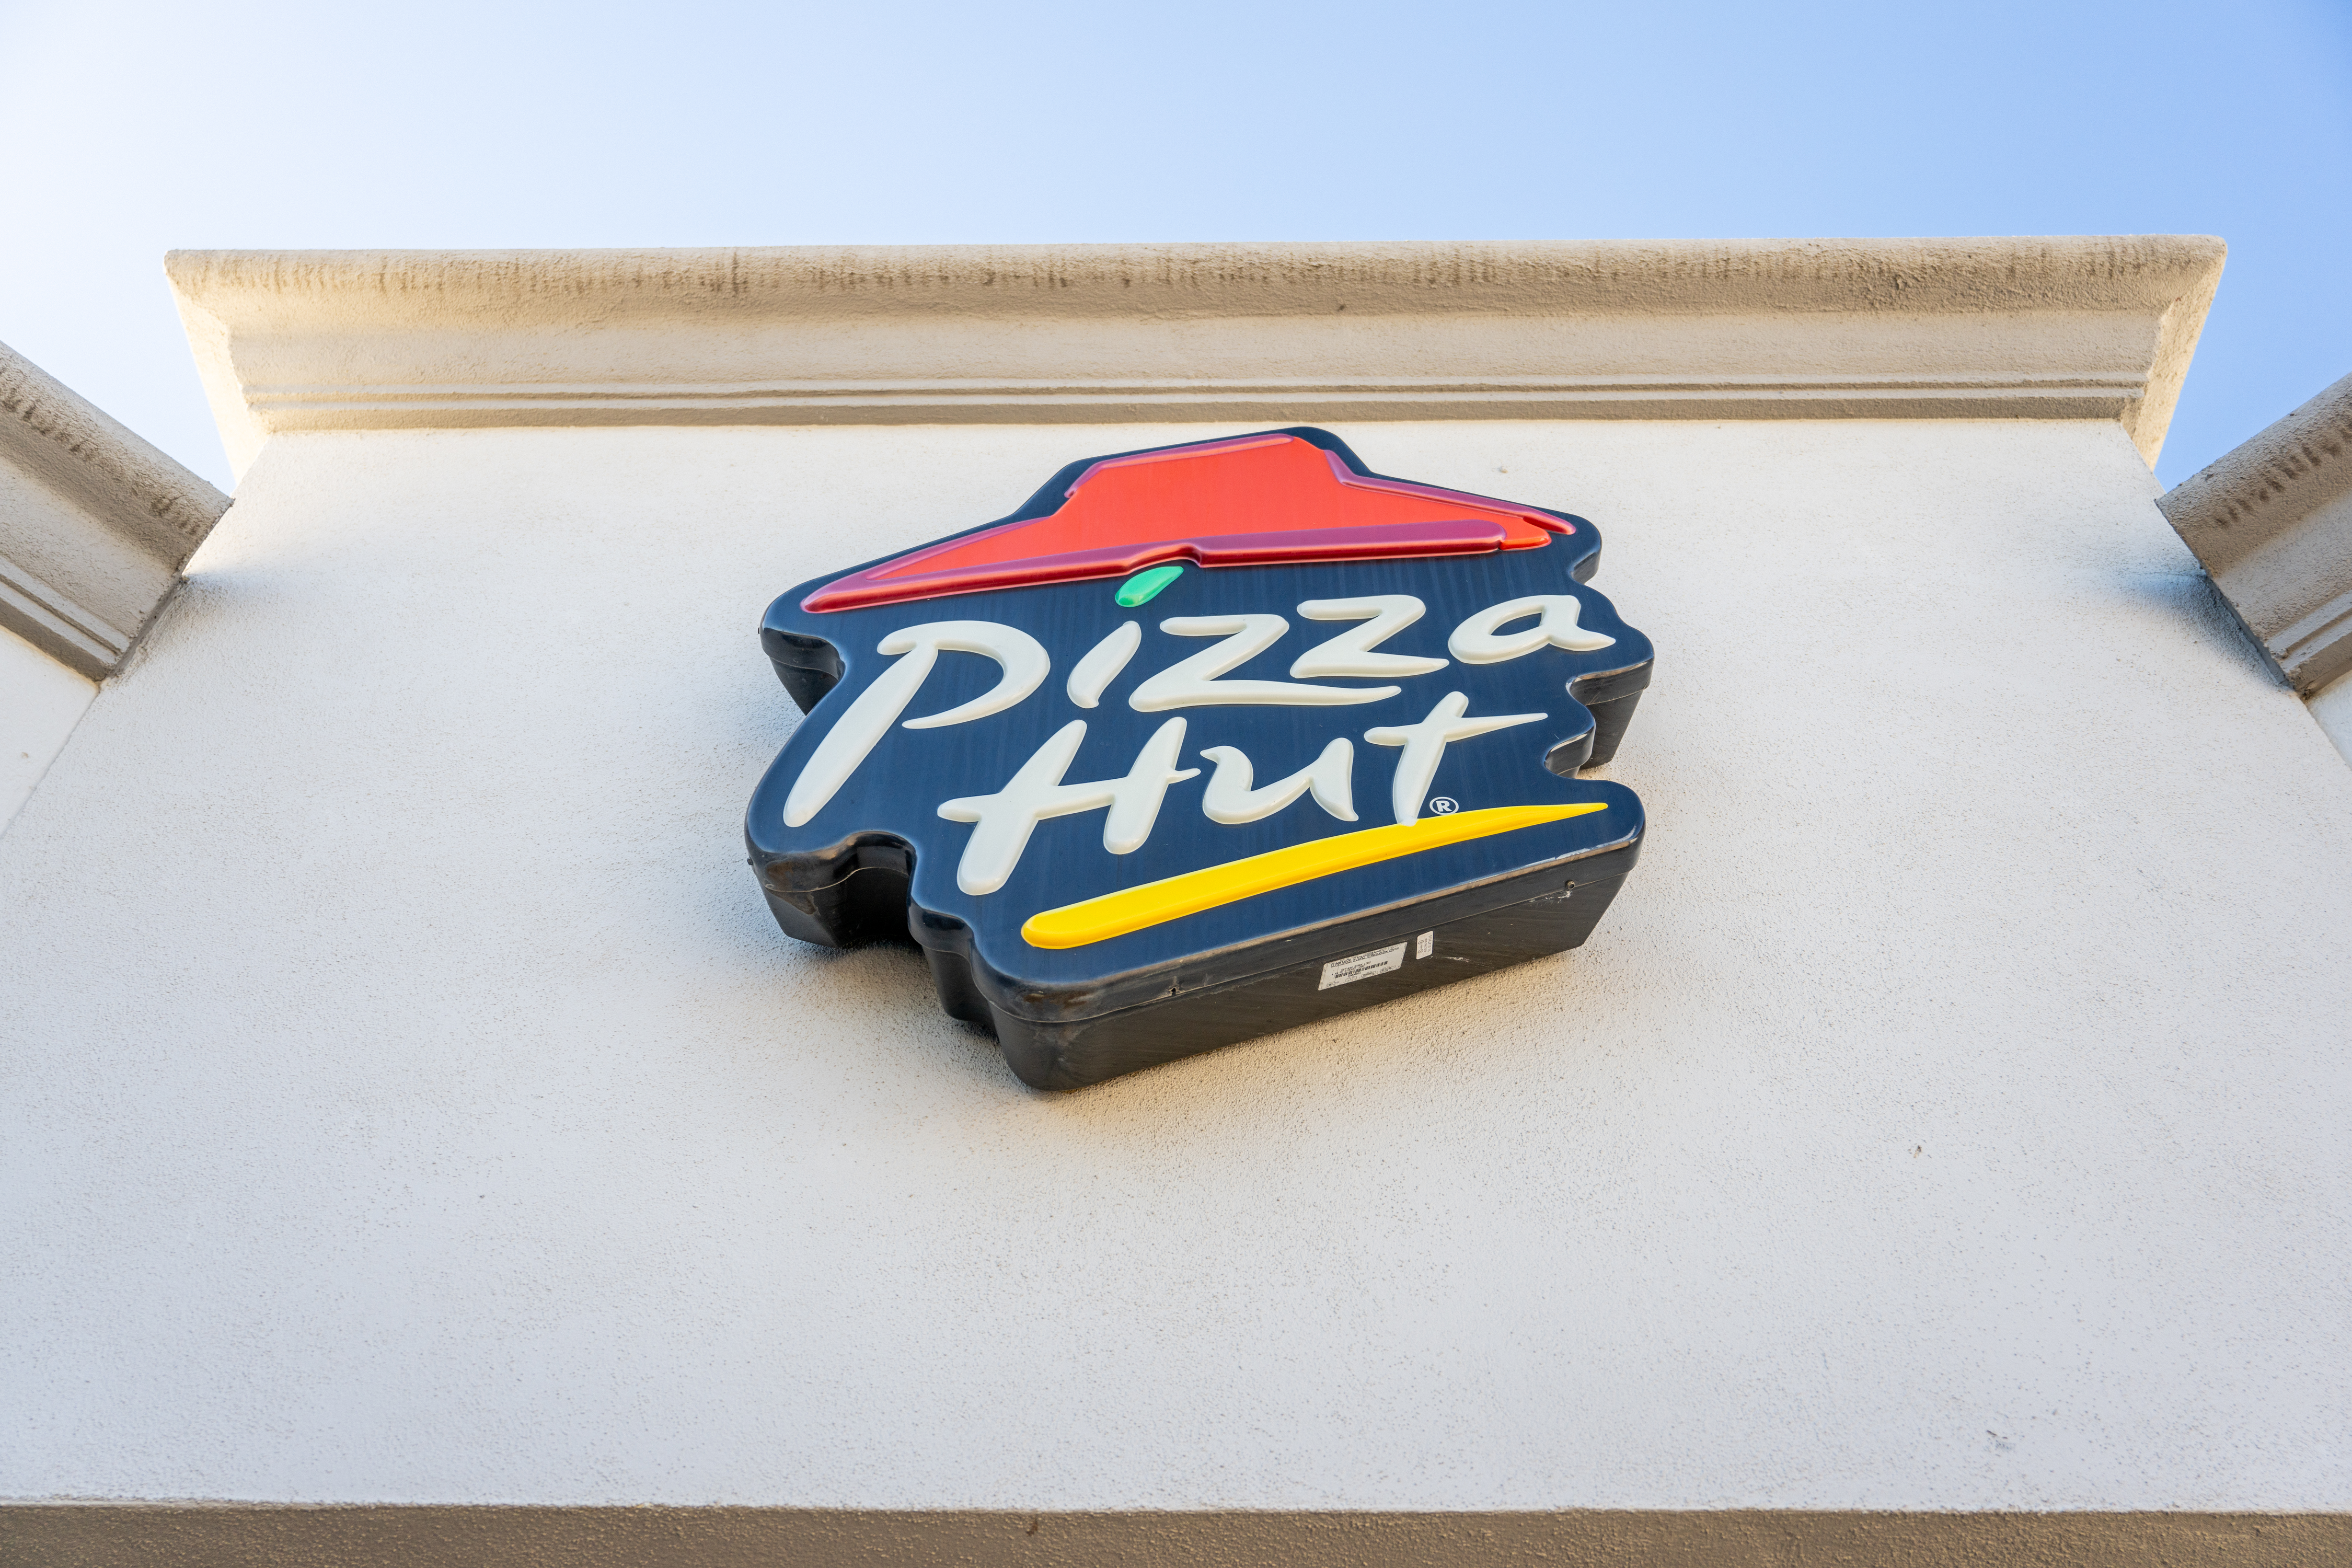 Ahead of California raising minimum wages for fast food workers to $20/hour, Pizza Hut will lay off 2,000 delivery drivers